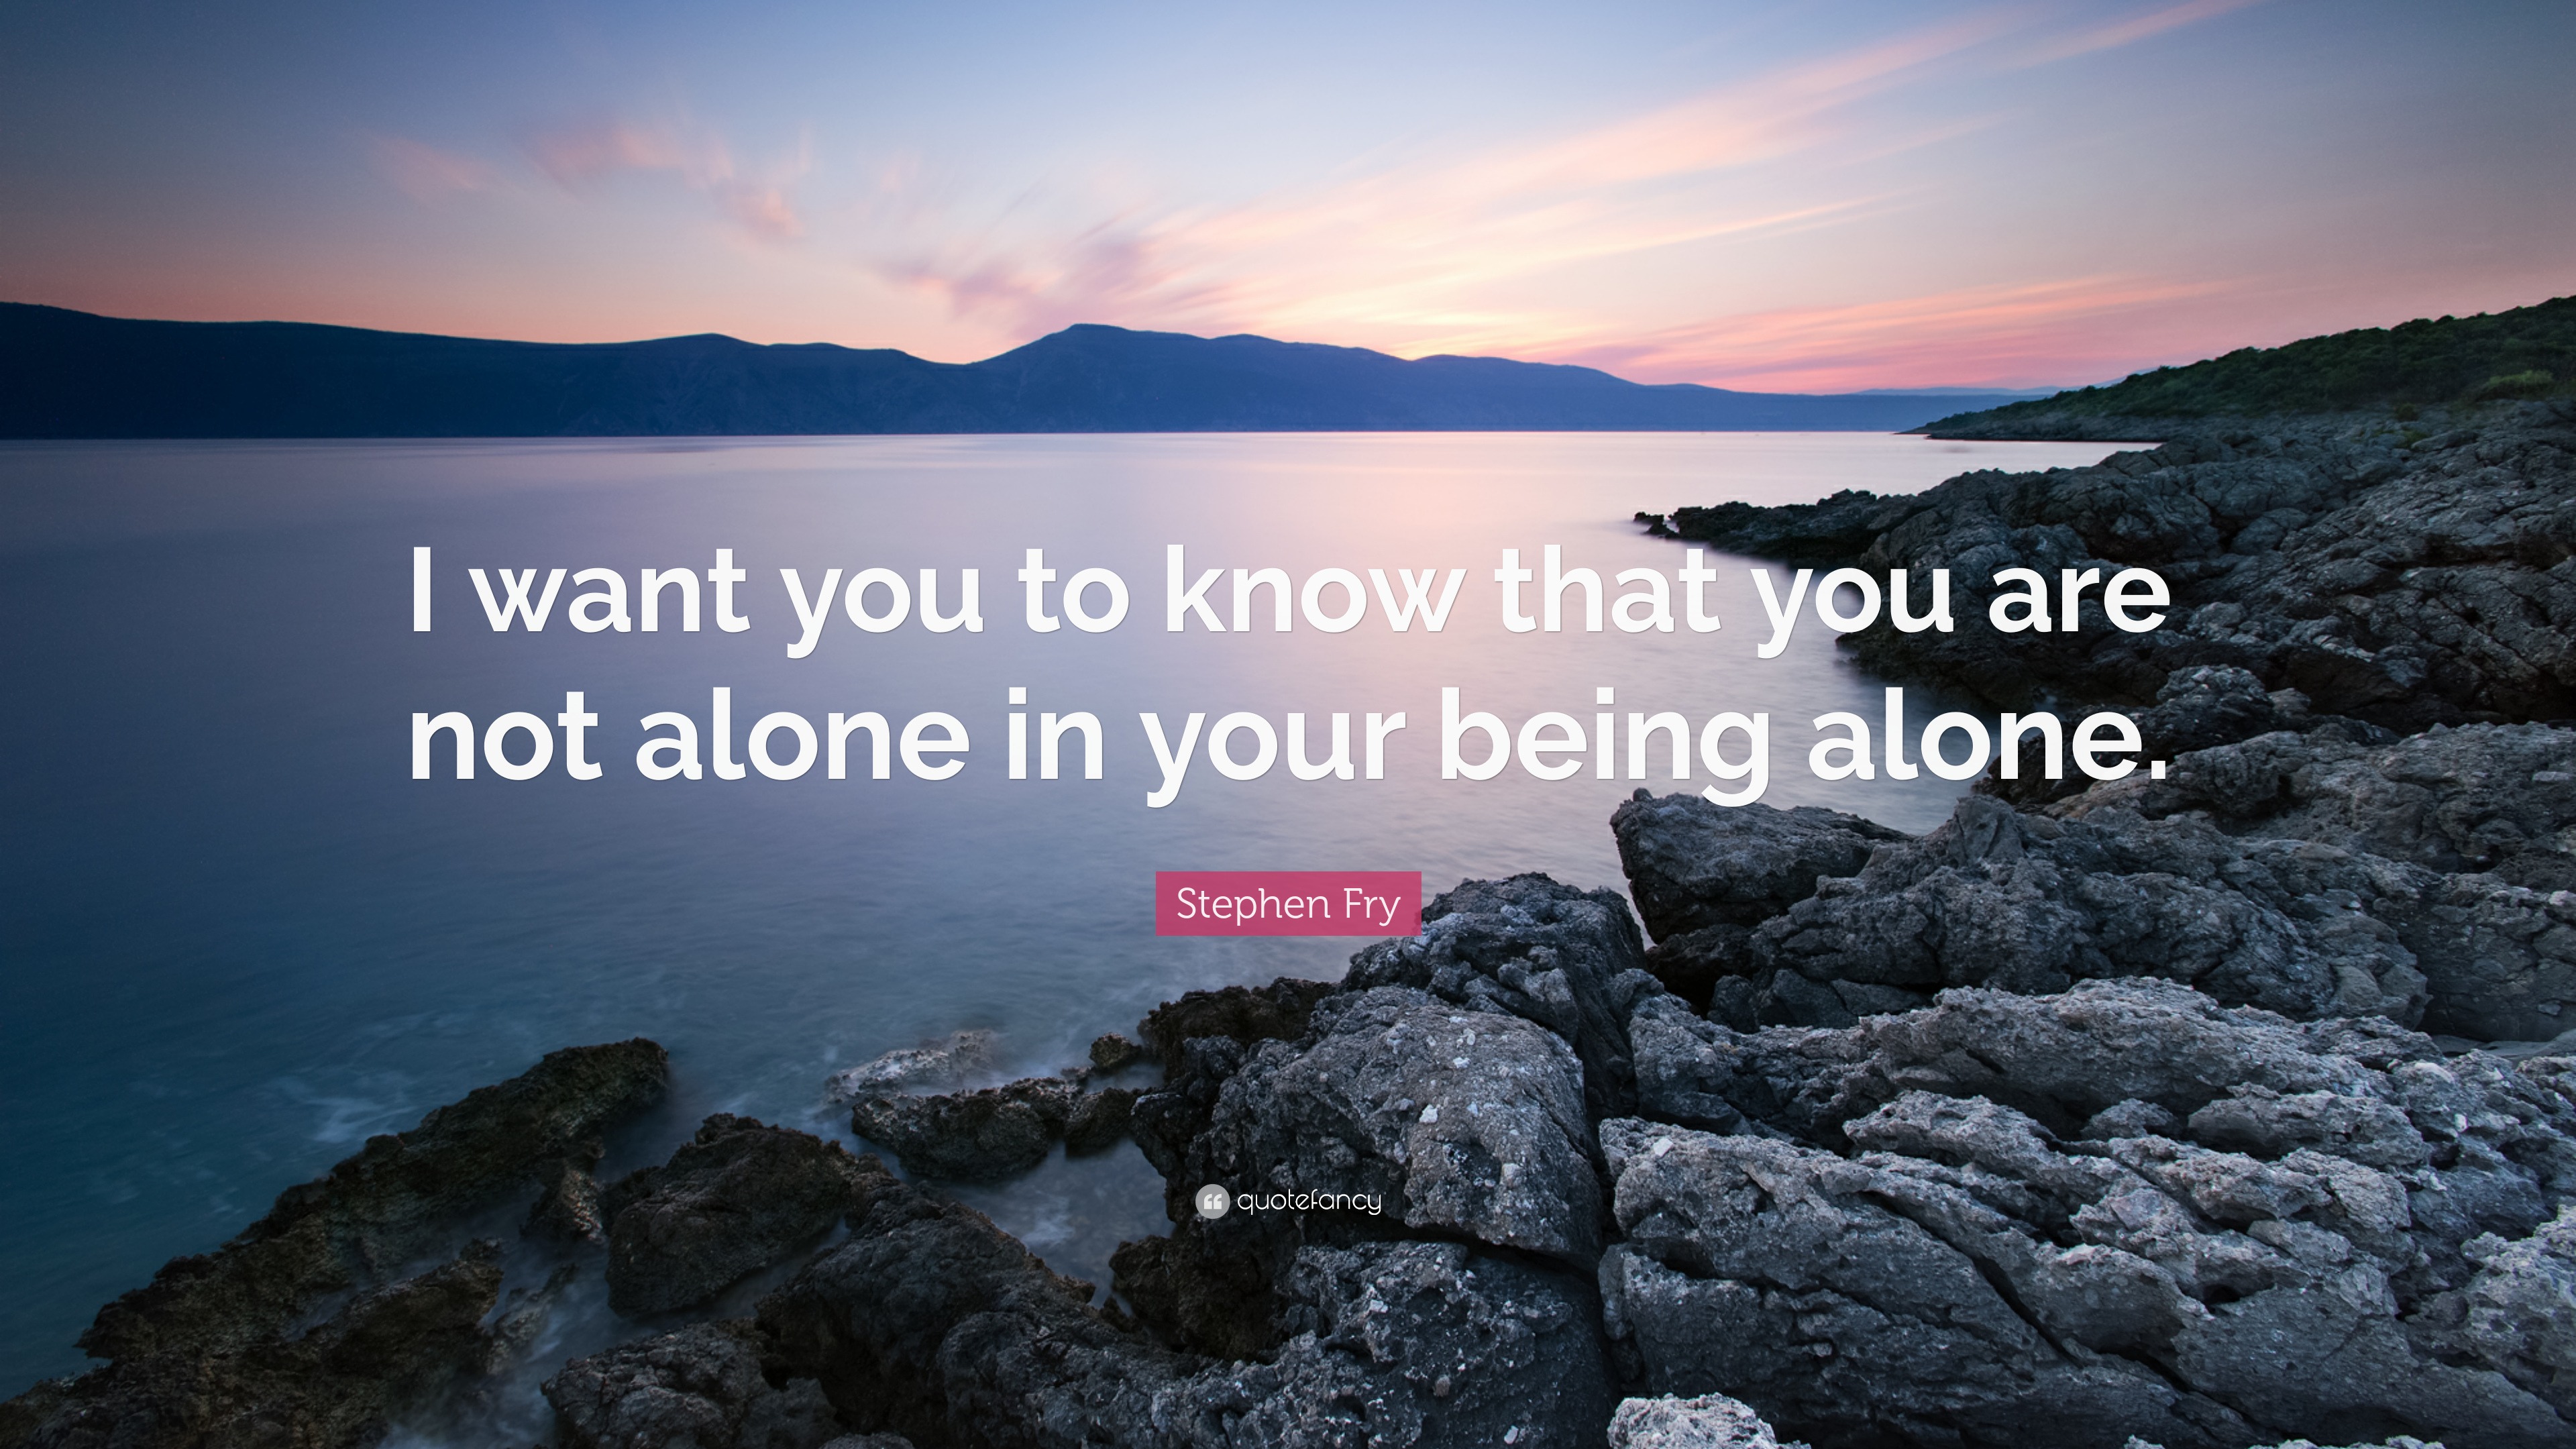 Stephen Fry Quote: “I Want You To Know That You Are Not Alone In Your Being